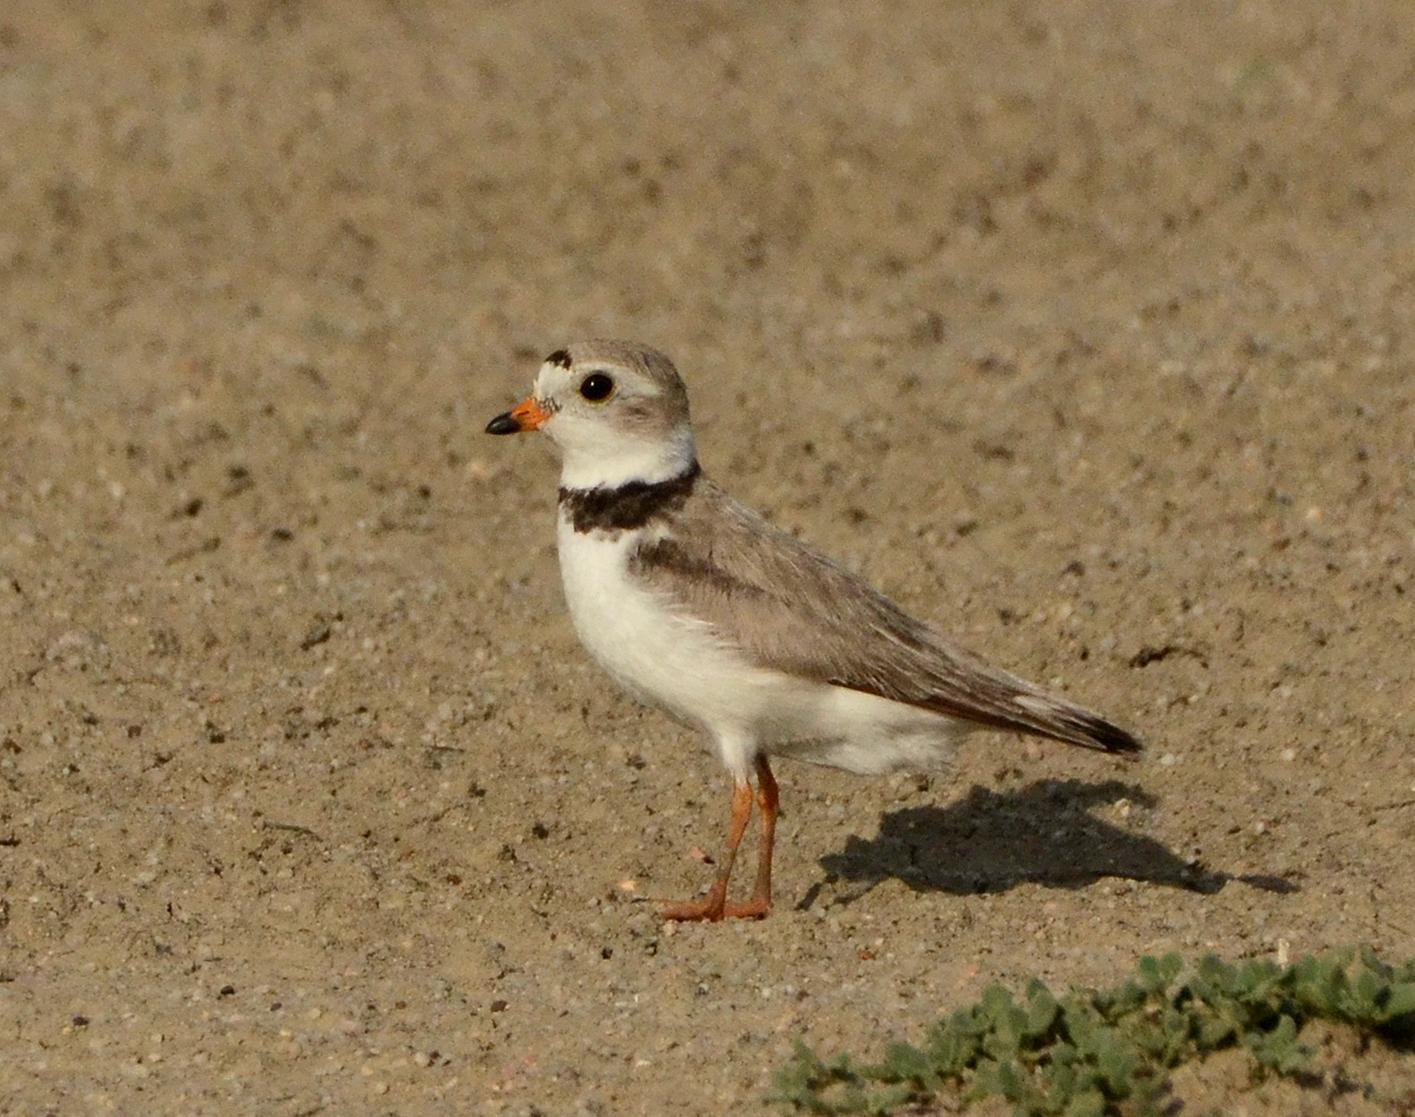 Piping Plover Photo by Steven Mlodinow